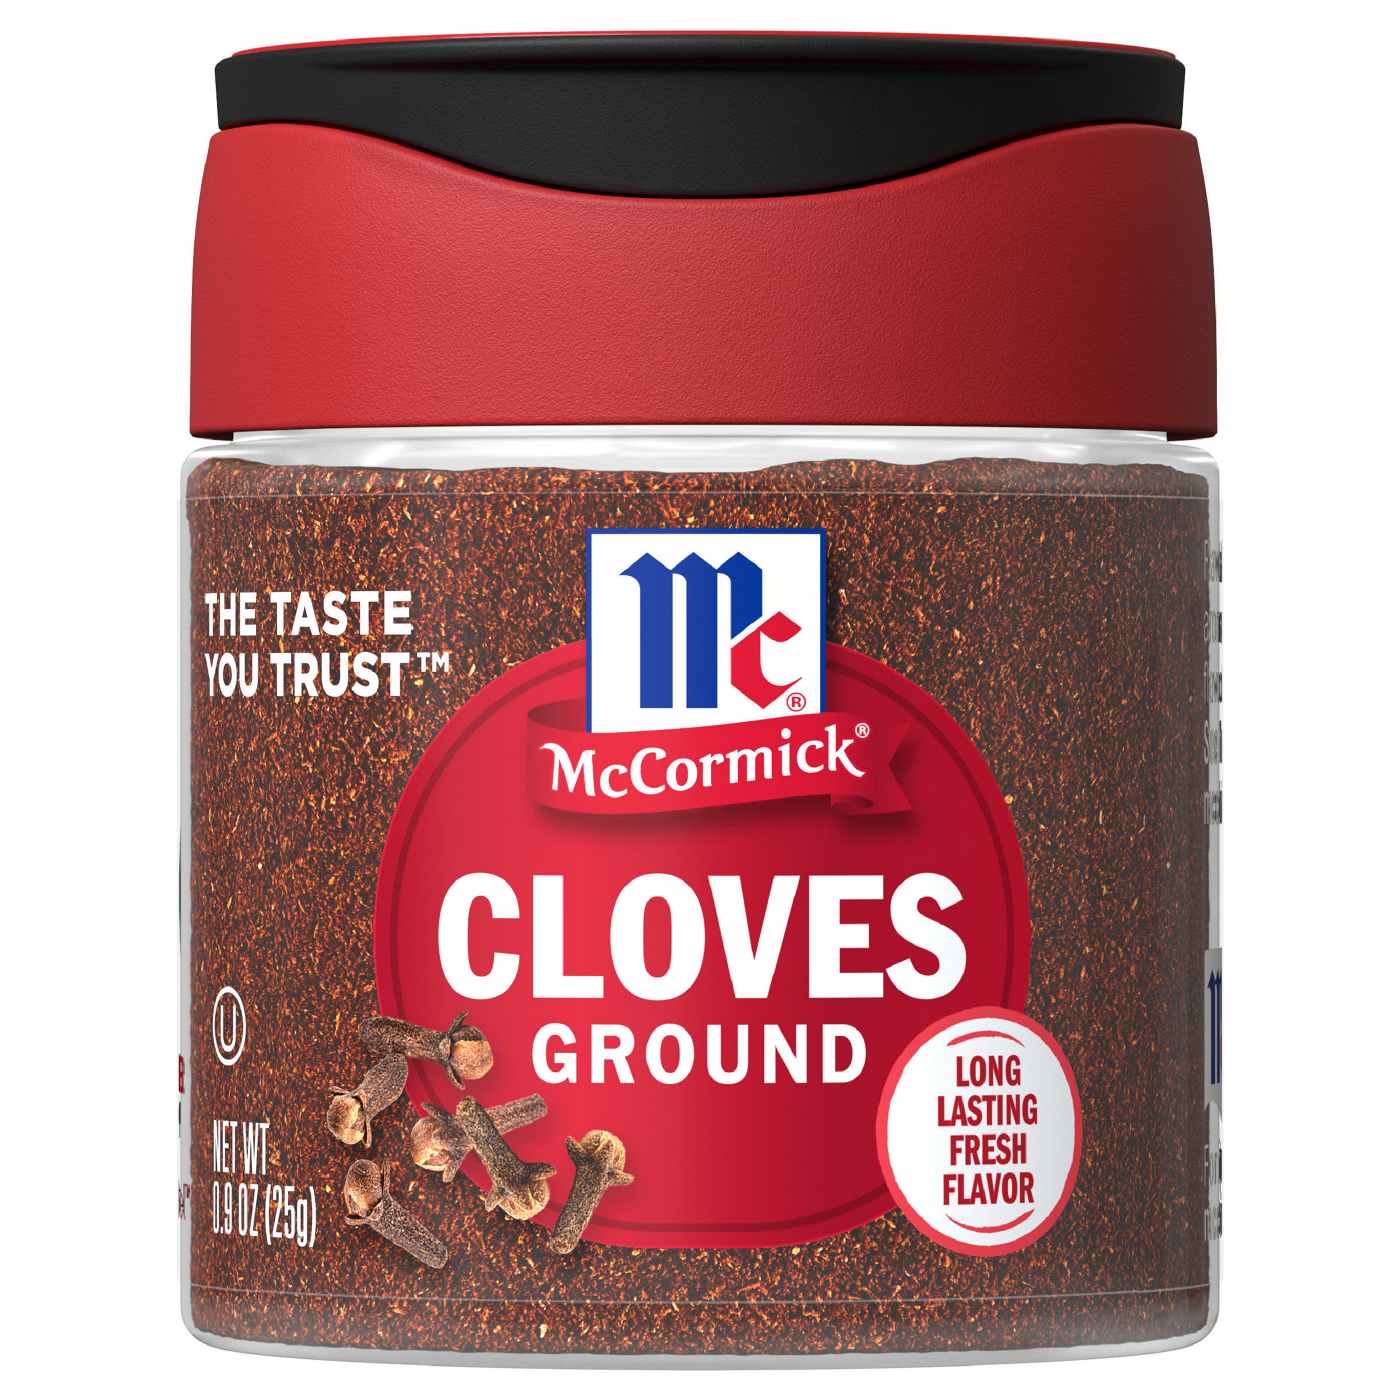 McCormick Ground Cloves; image 1 of 8